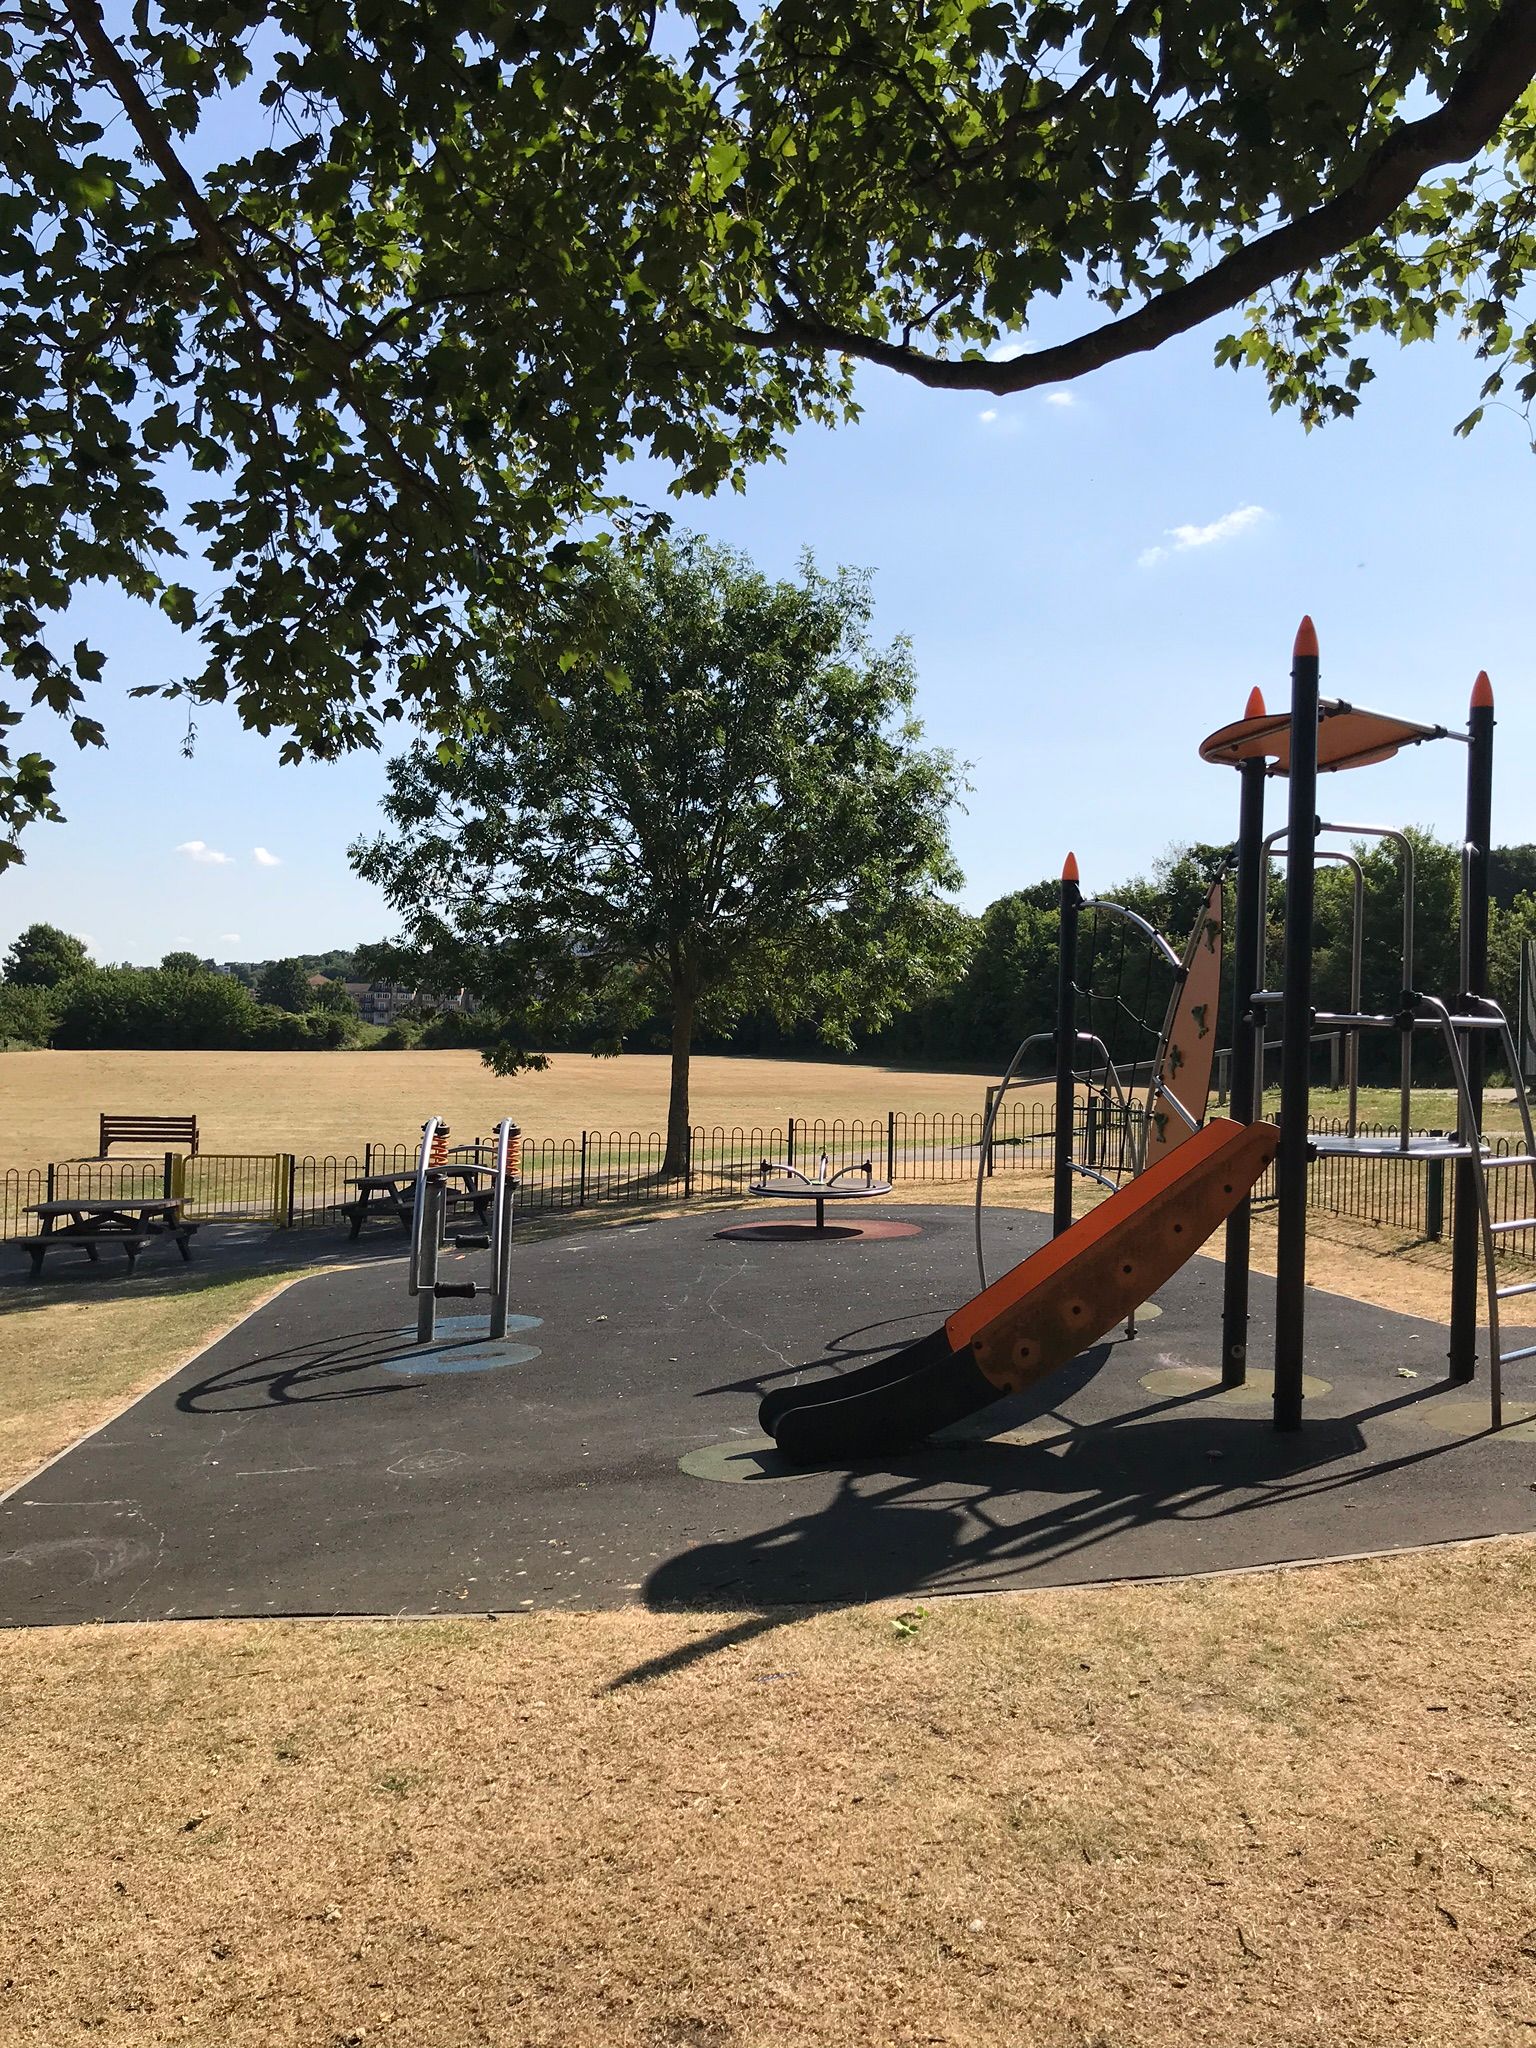 Older children's play equipment at Borstal recreation ground; climbing frame, round-a-bout and springy see-saw